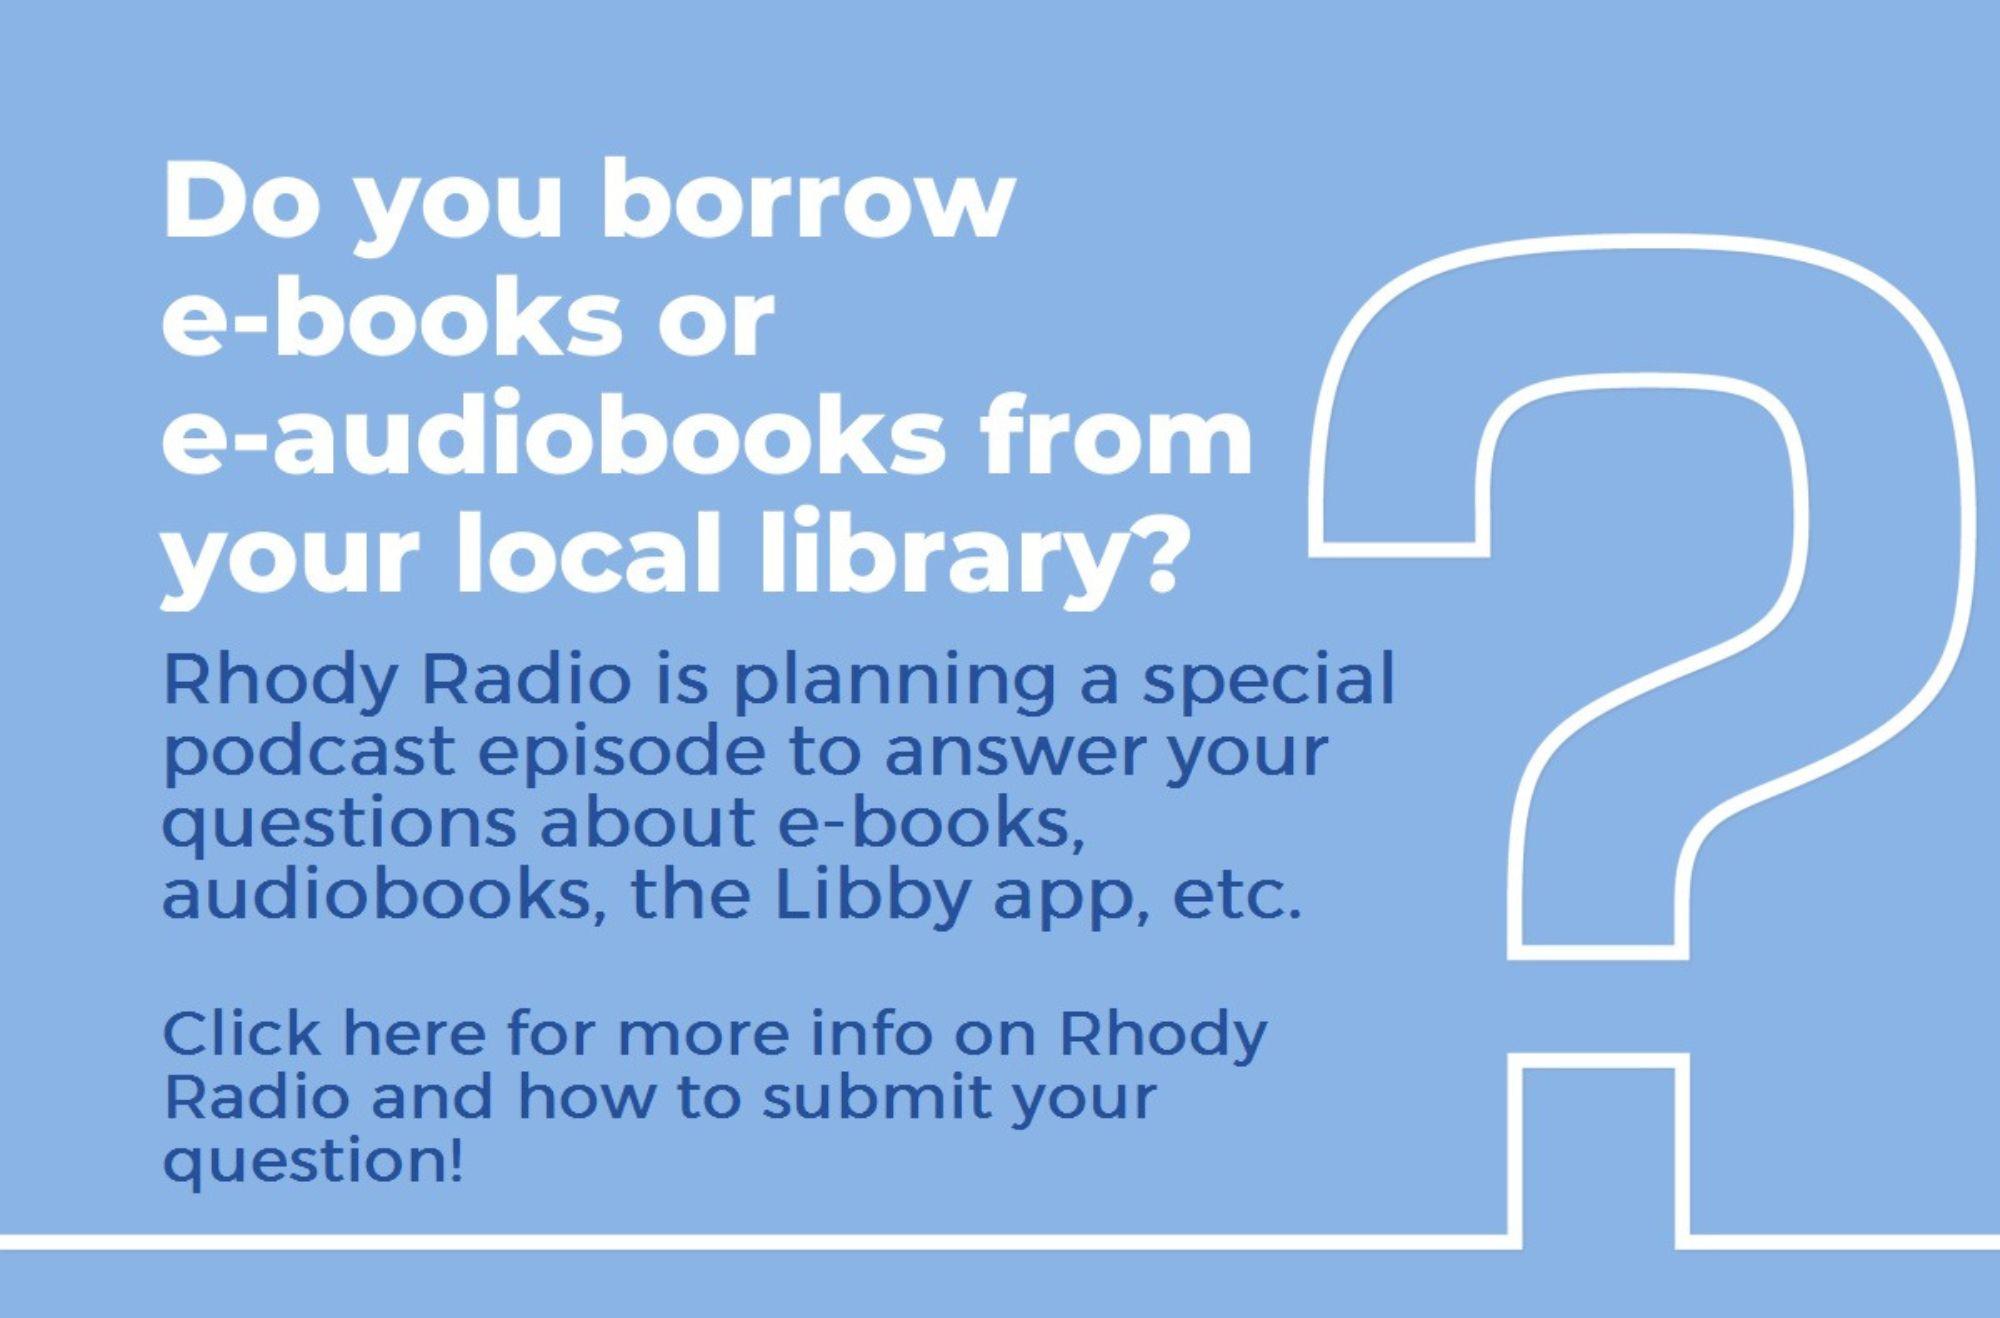 Blue background with big, white question mark and text: Do you borrow e-books or e-audiobooks from your local library? Rhody Radio is planning a special podcast episode to answer your questions about e-books, audiobooks, the Libby app, etc. Click here for more info on Rhody Radio and how to submit your question!